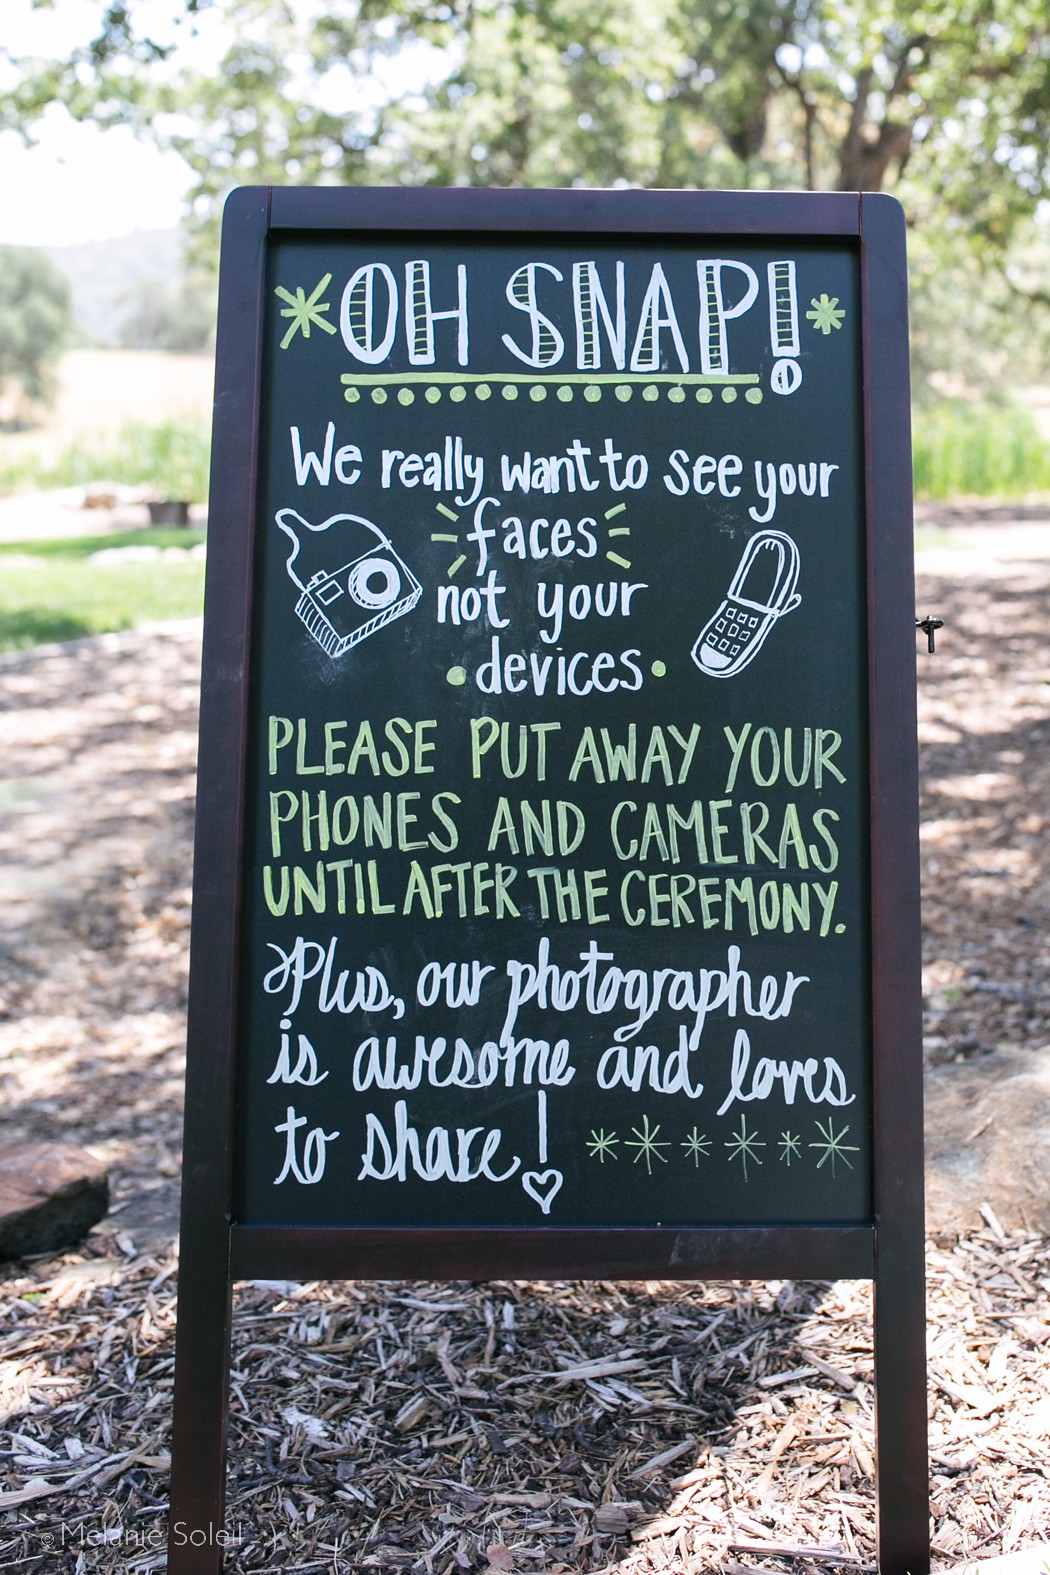 6 easy ways to have an unplugged wedding ceremony